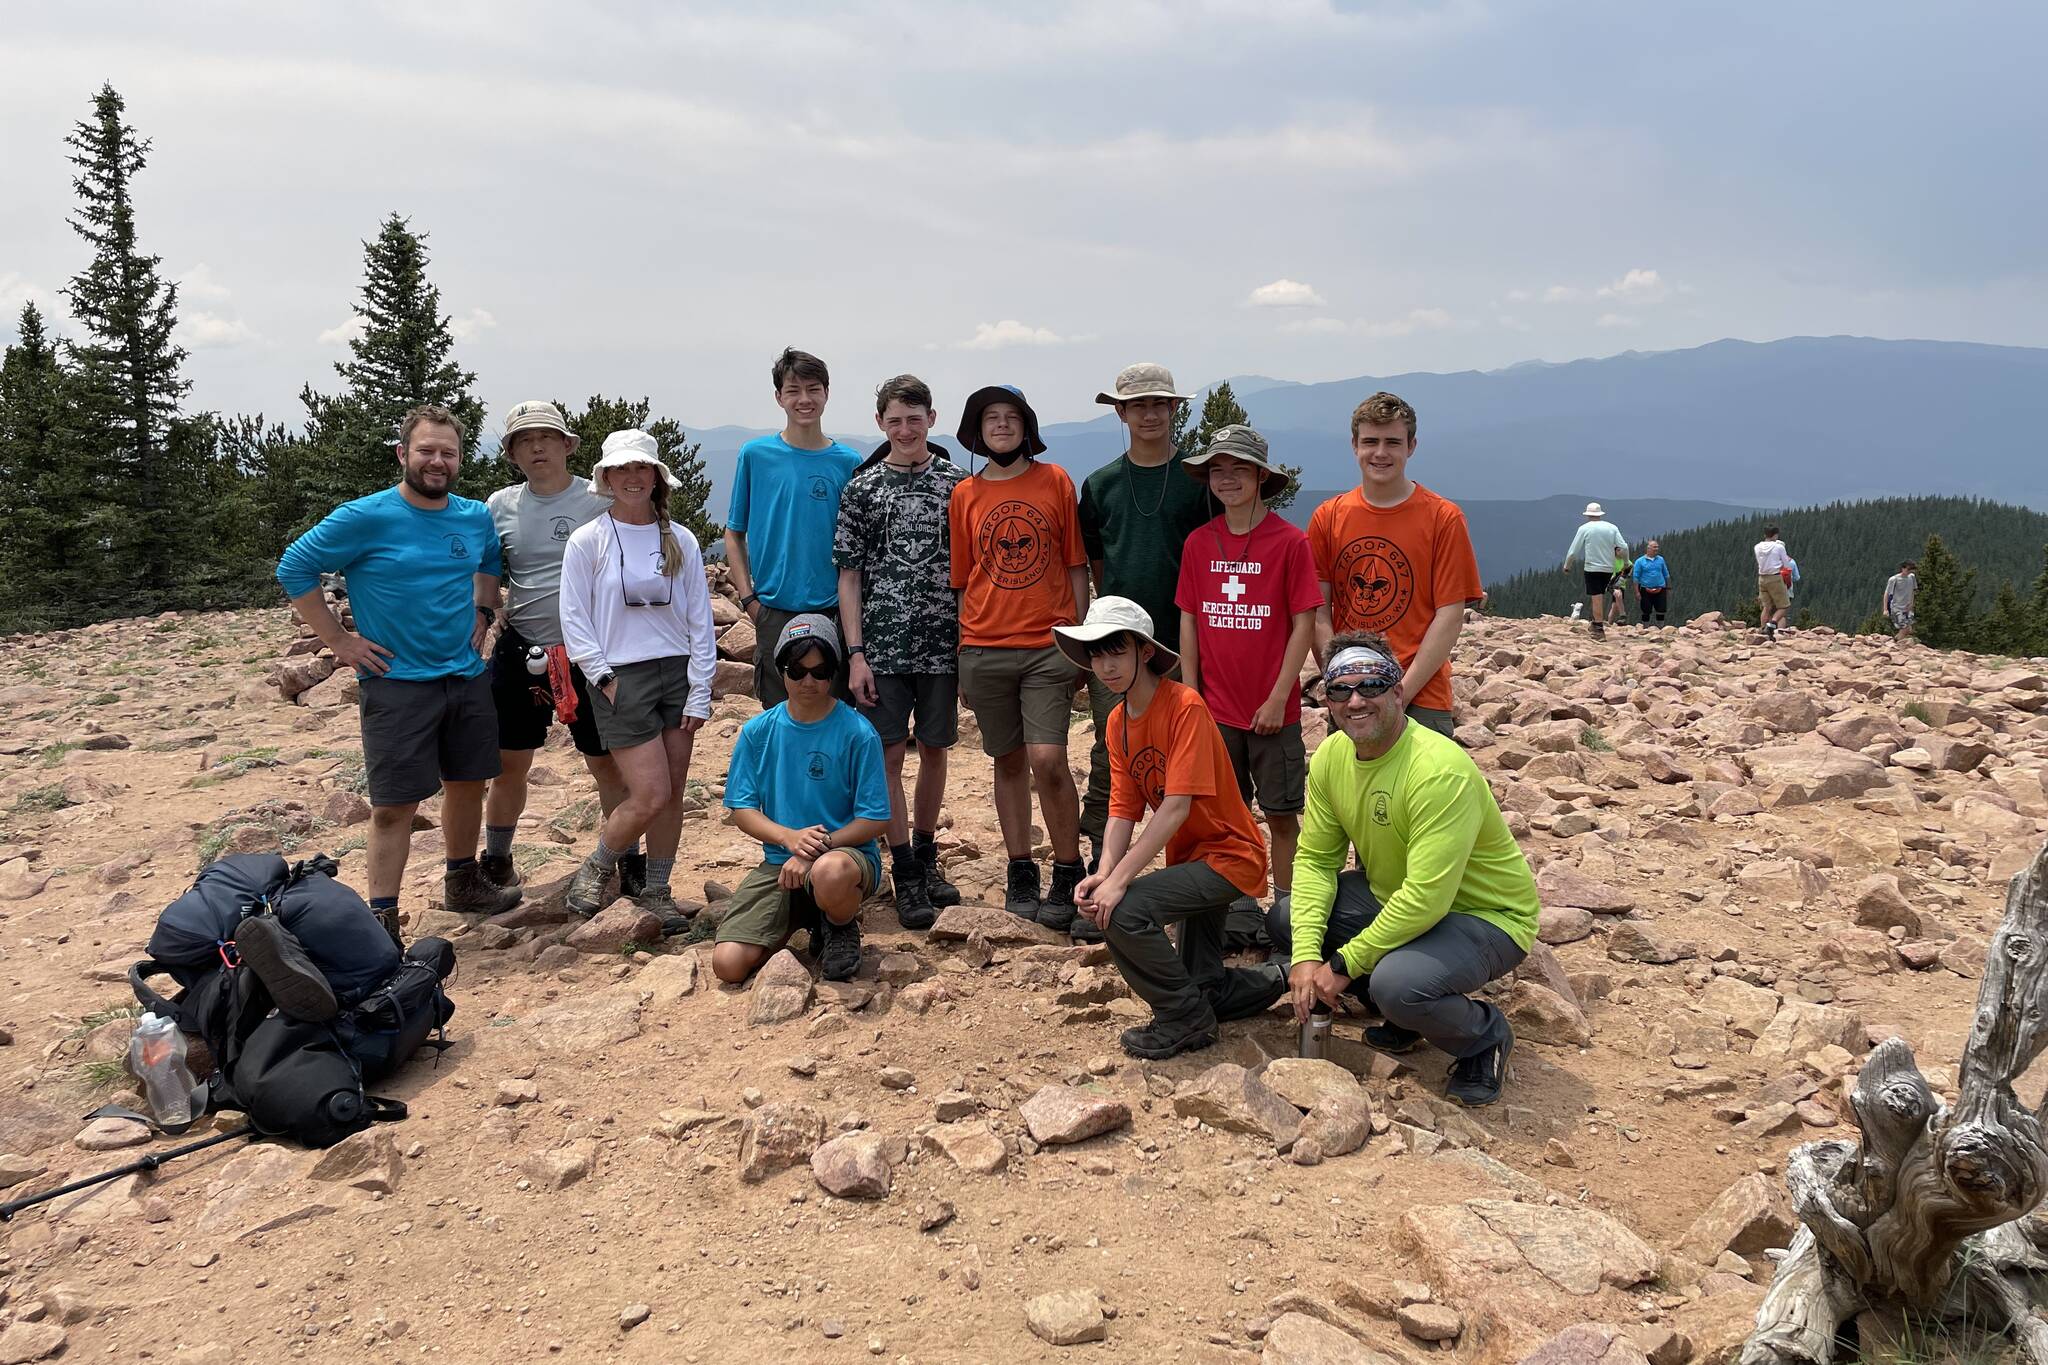 Troop 647 at Philmont. Courtesy photo